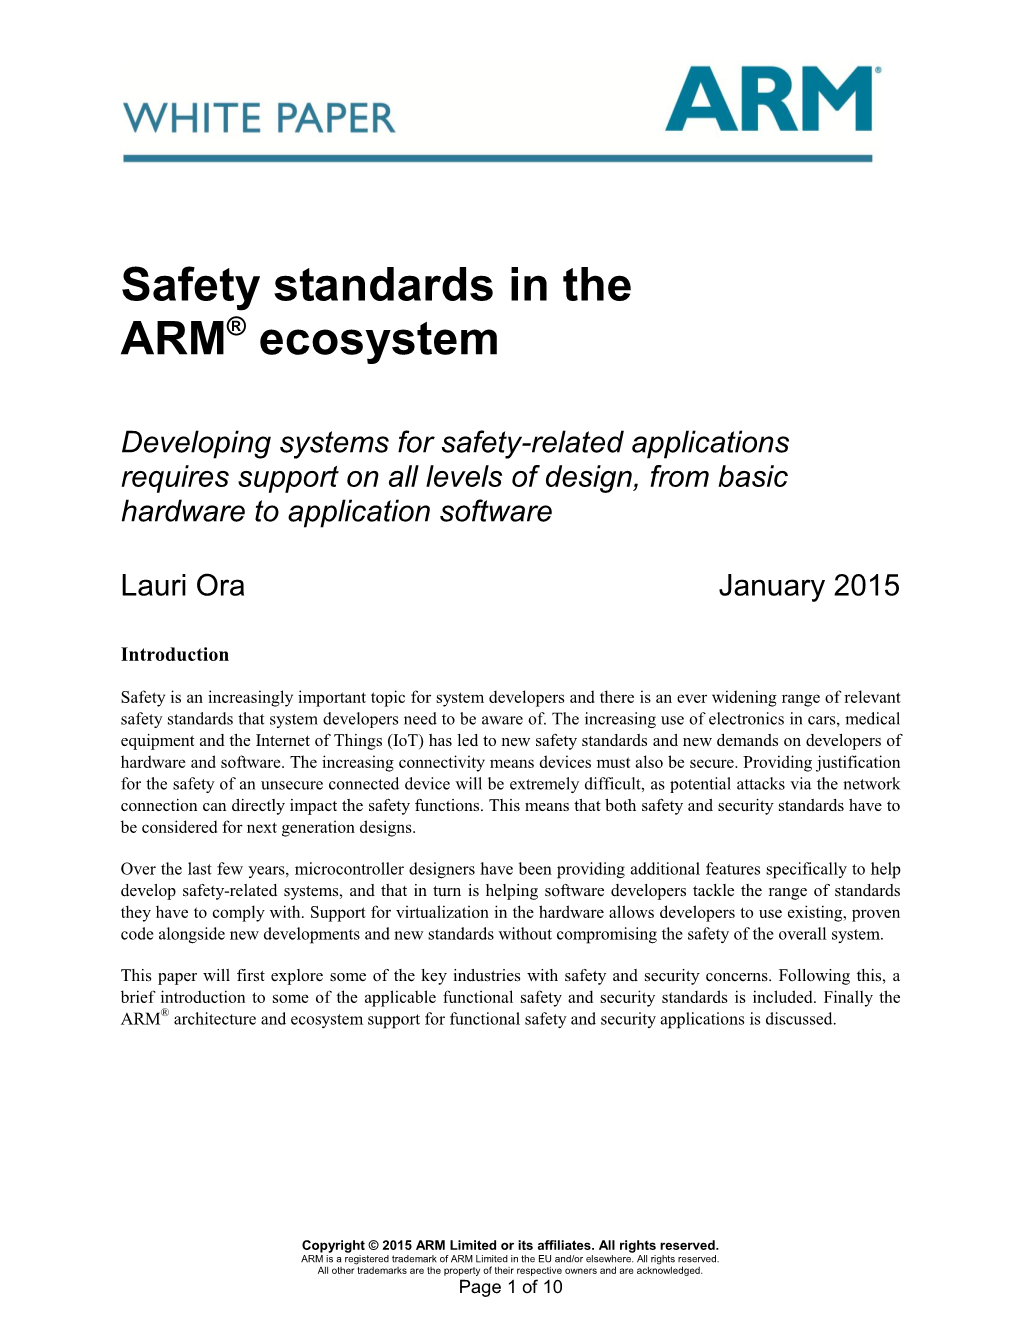 Safety Standards in the ARM® Ecosystem